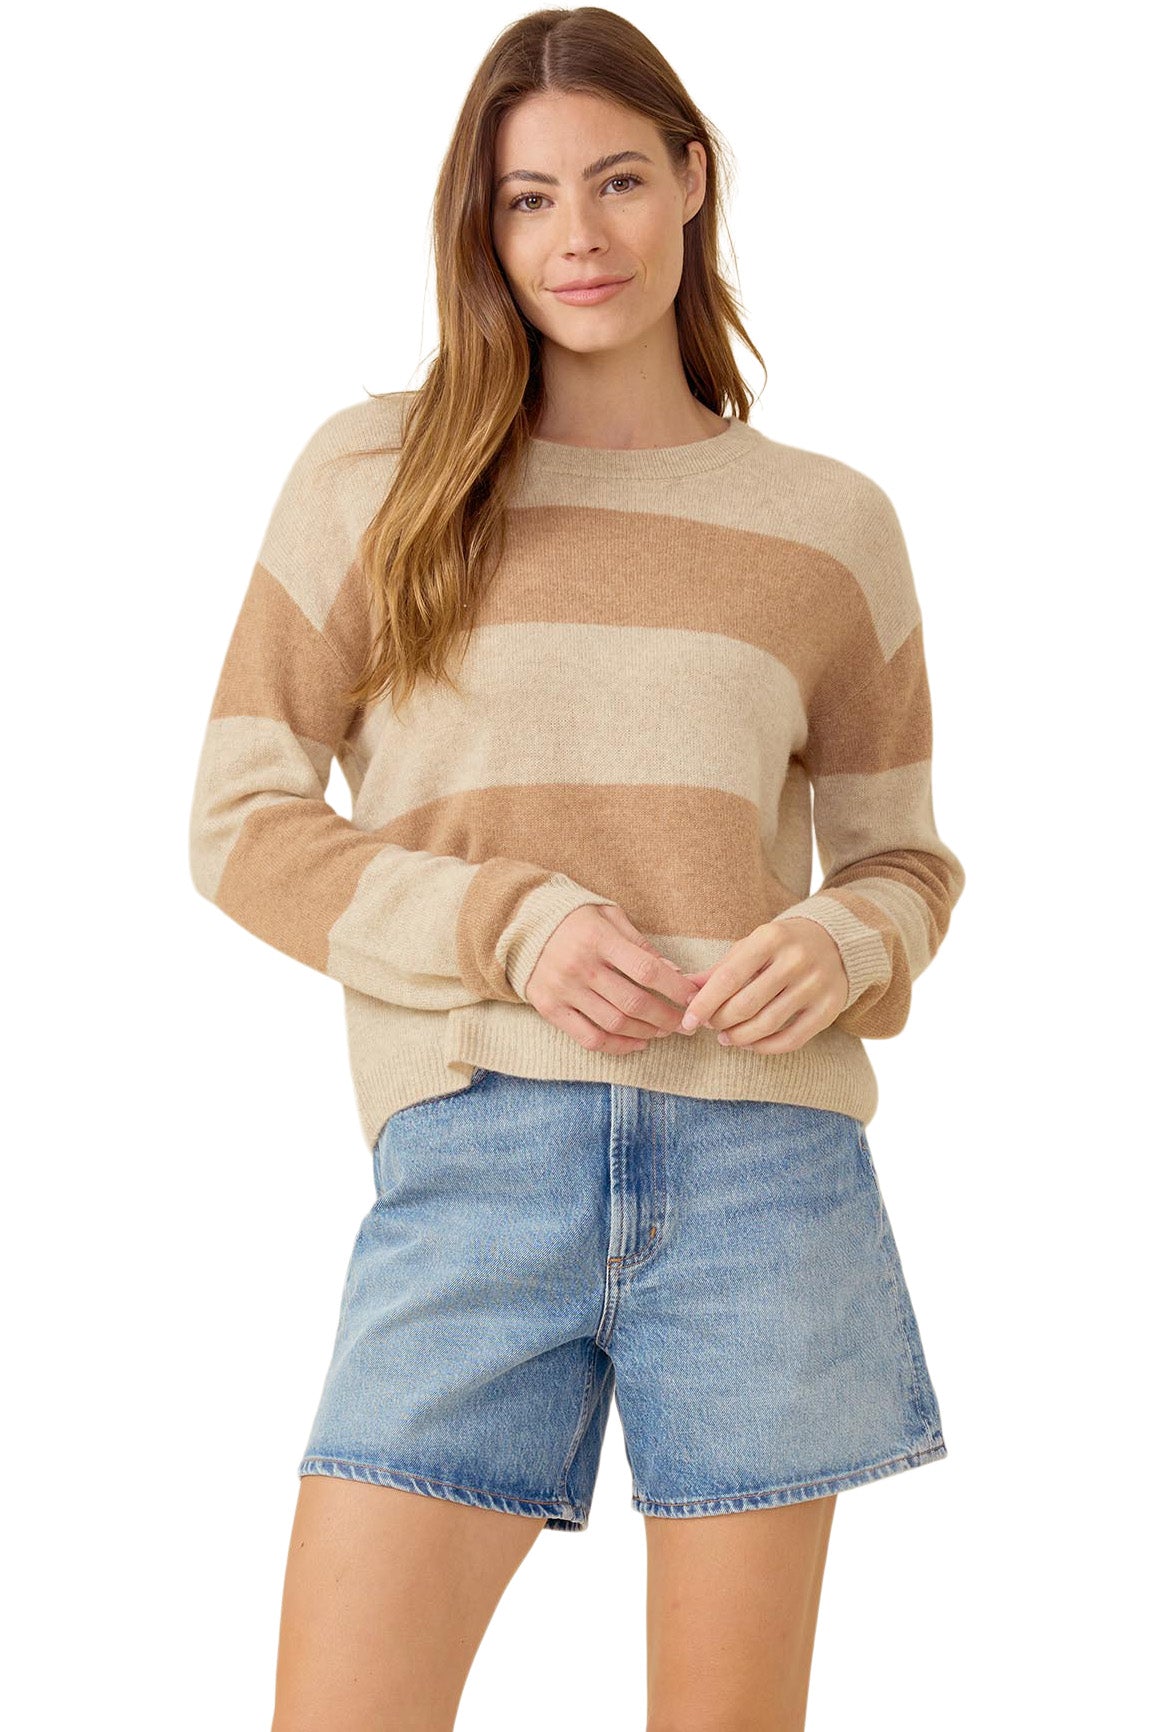 One Grey Day Sloane Boxy Pullover in Oatmeal Combo